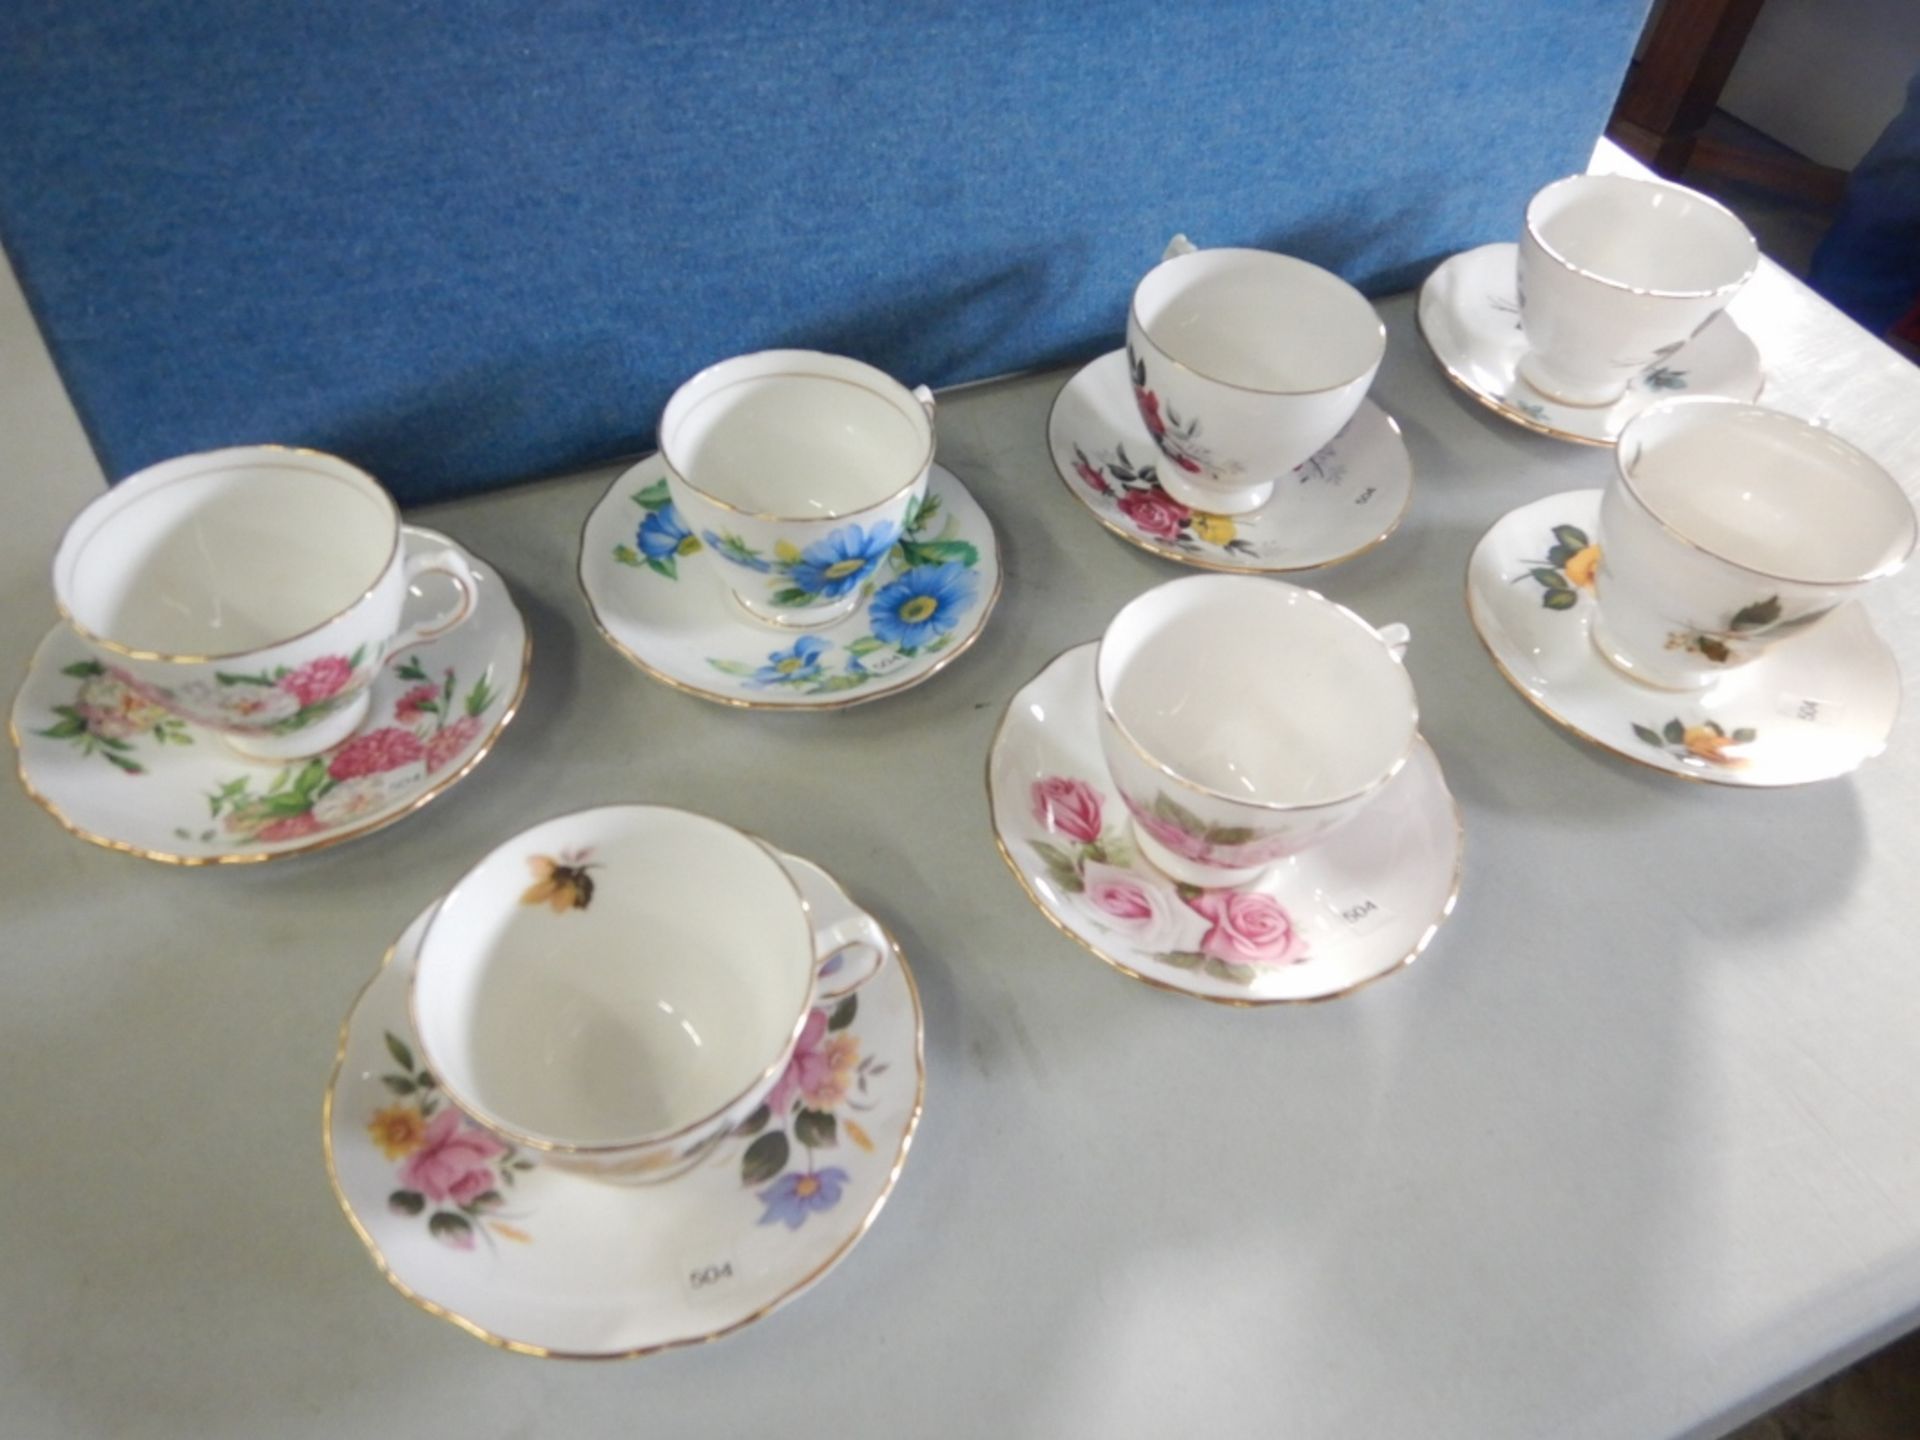 ANTIQUE TEACUPS & SAUCERS - MADE IN ENGLAND - LOT OF 7 - BONE CHINA #8273 - YELLOW FLOWERS, #